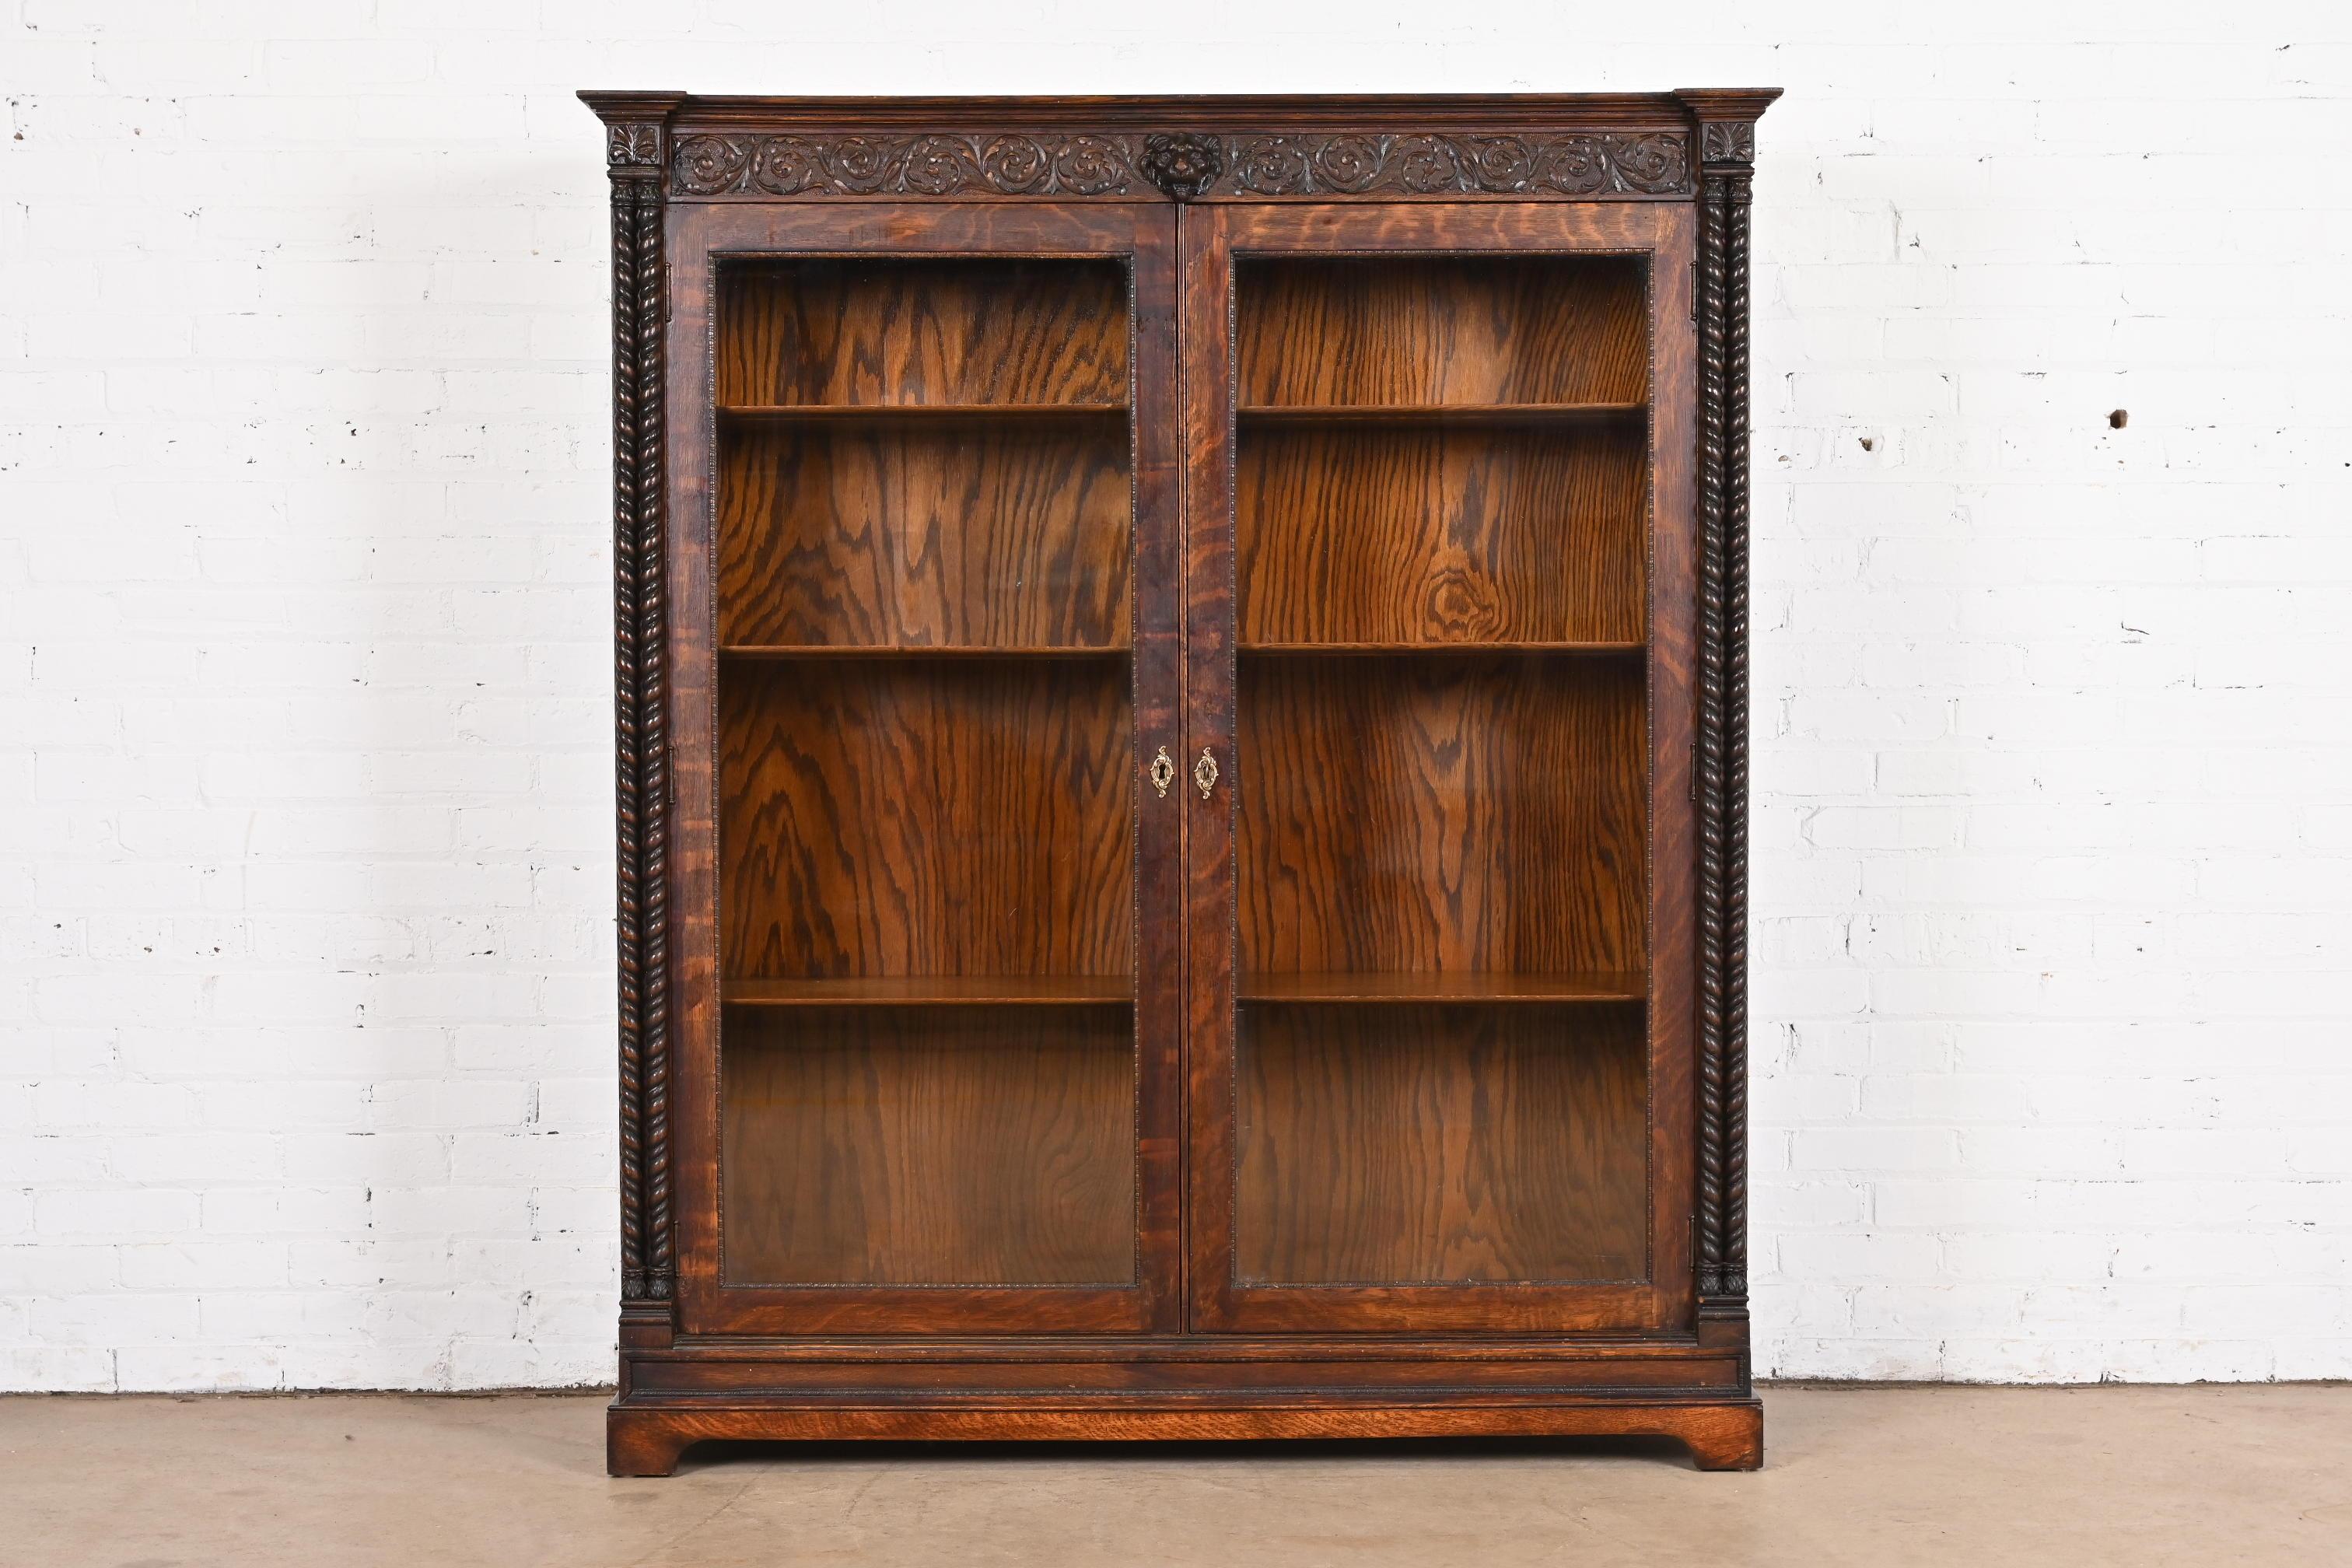 A gorgeous antique American Empire or late Victorian double bookcase

In the manner of R.J. Horner

USA, Circa 1890

Beautiful quarter sawn oak, with carved lion head and foliage, glass front doors, and brass hardware. Cabinet locks, and key is